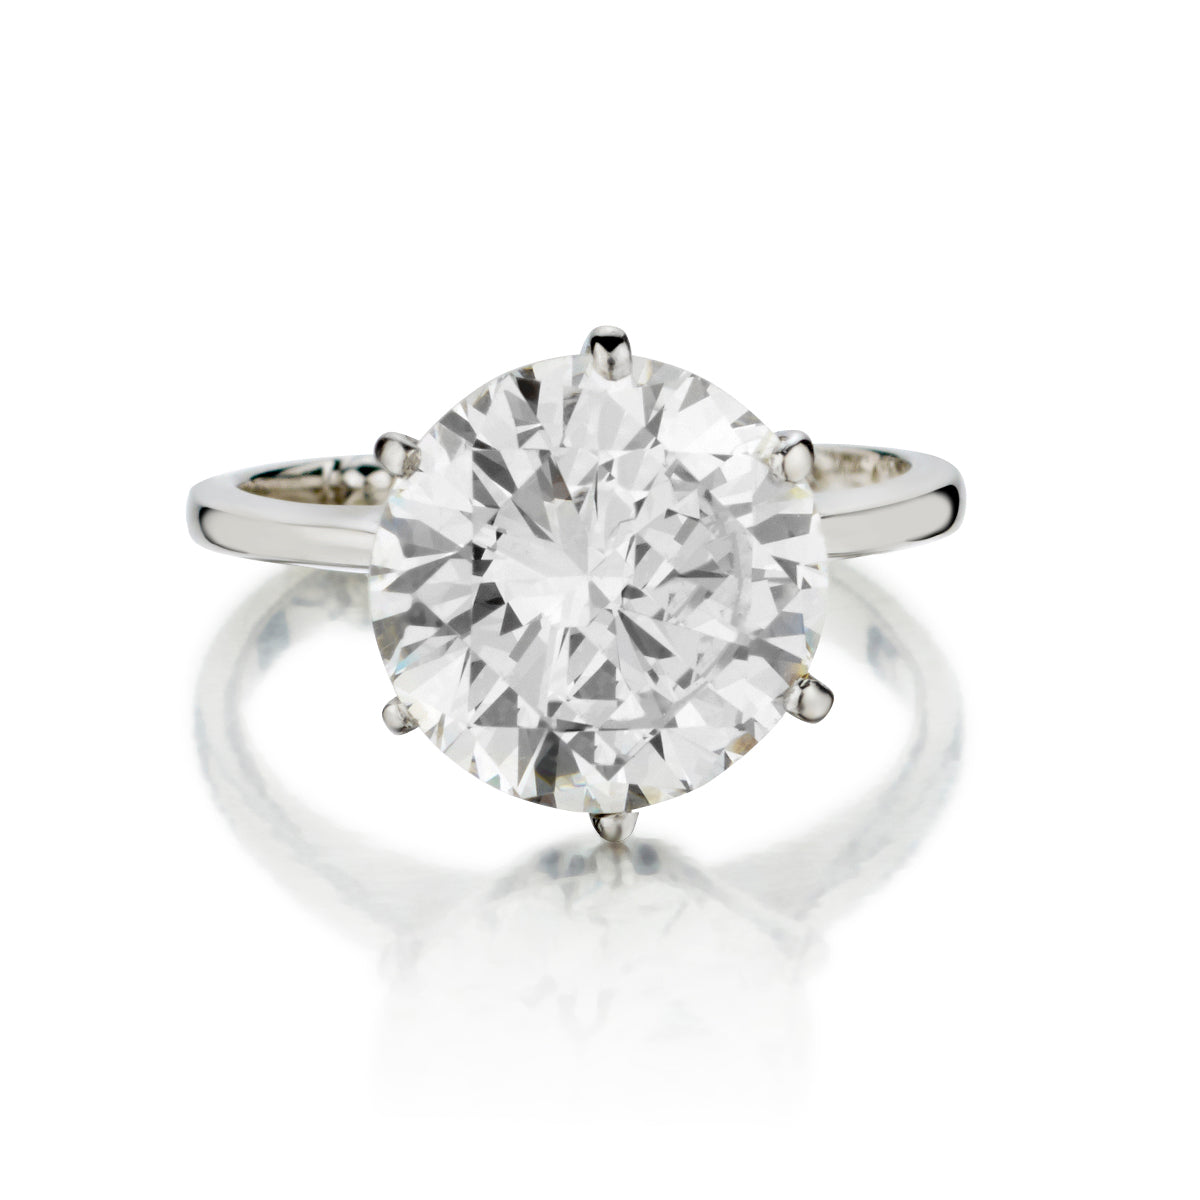 14kt White Gold Diamond Solitaire Ring. 5.29 Carat Weight